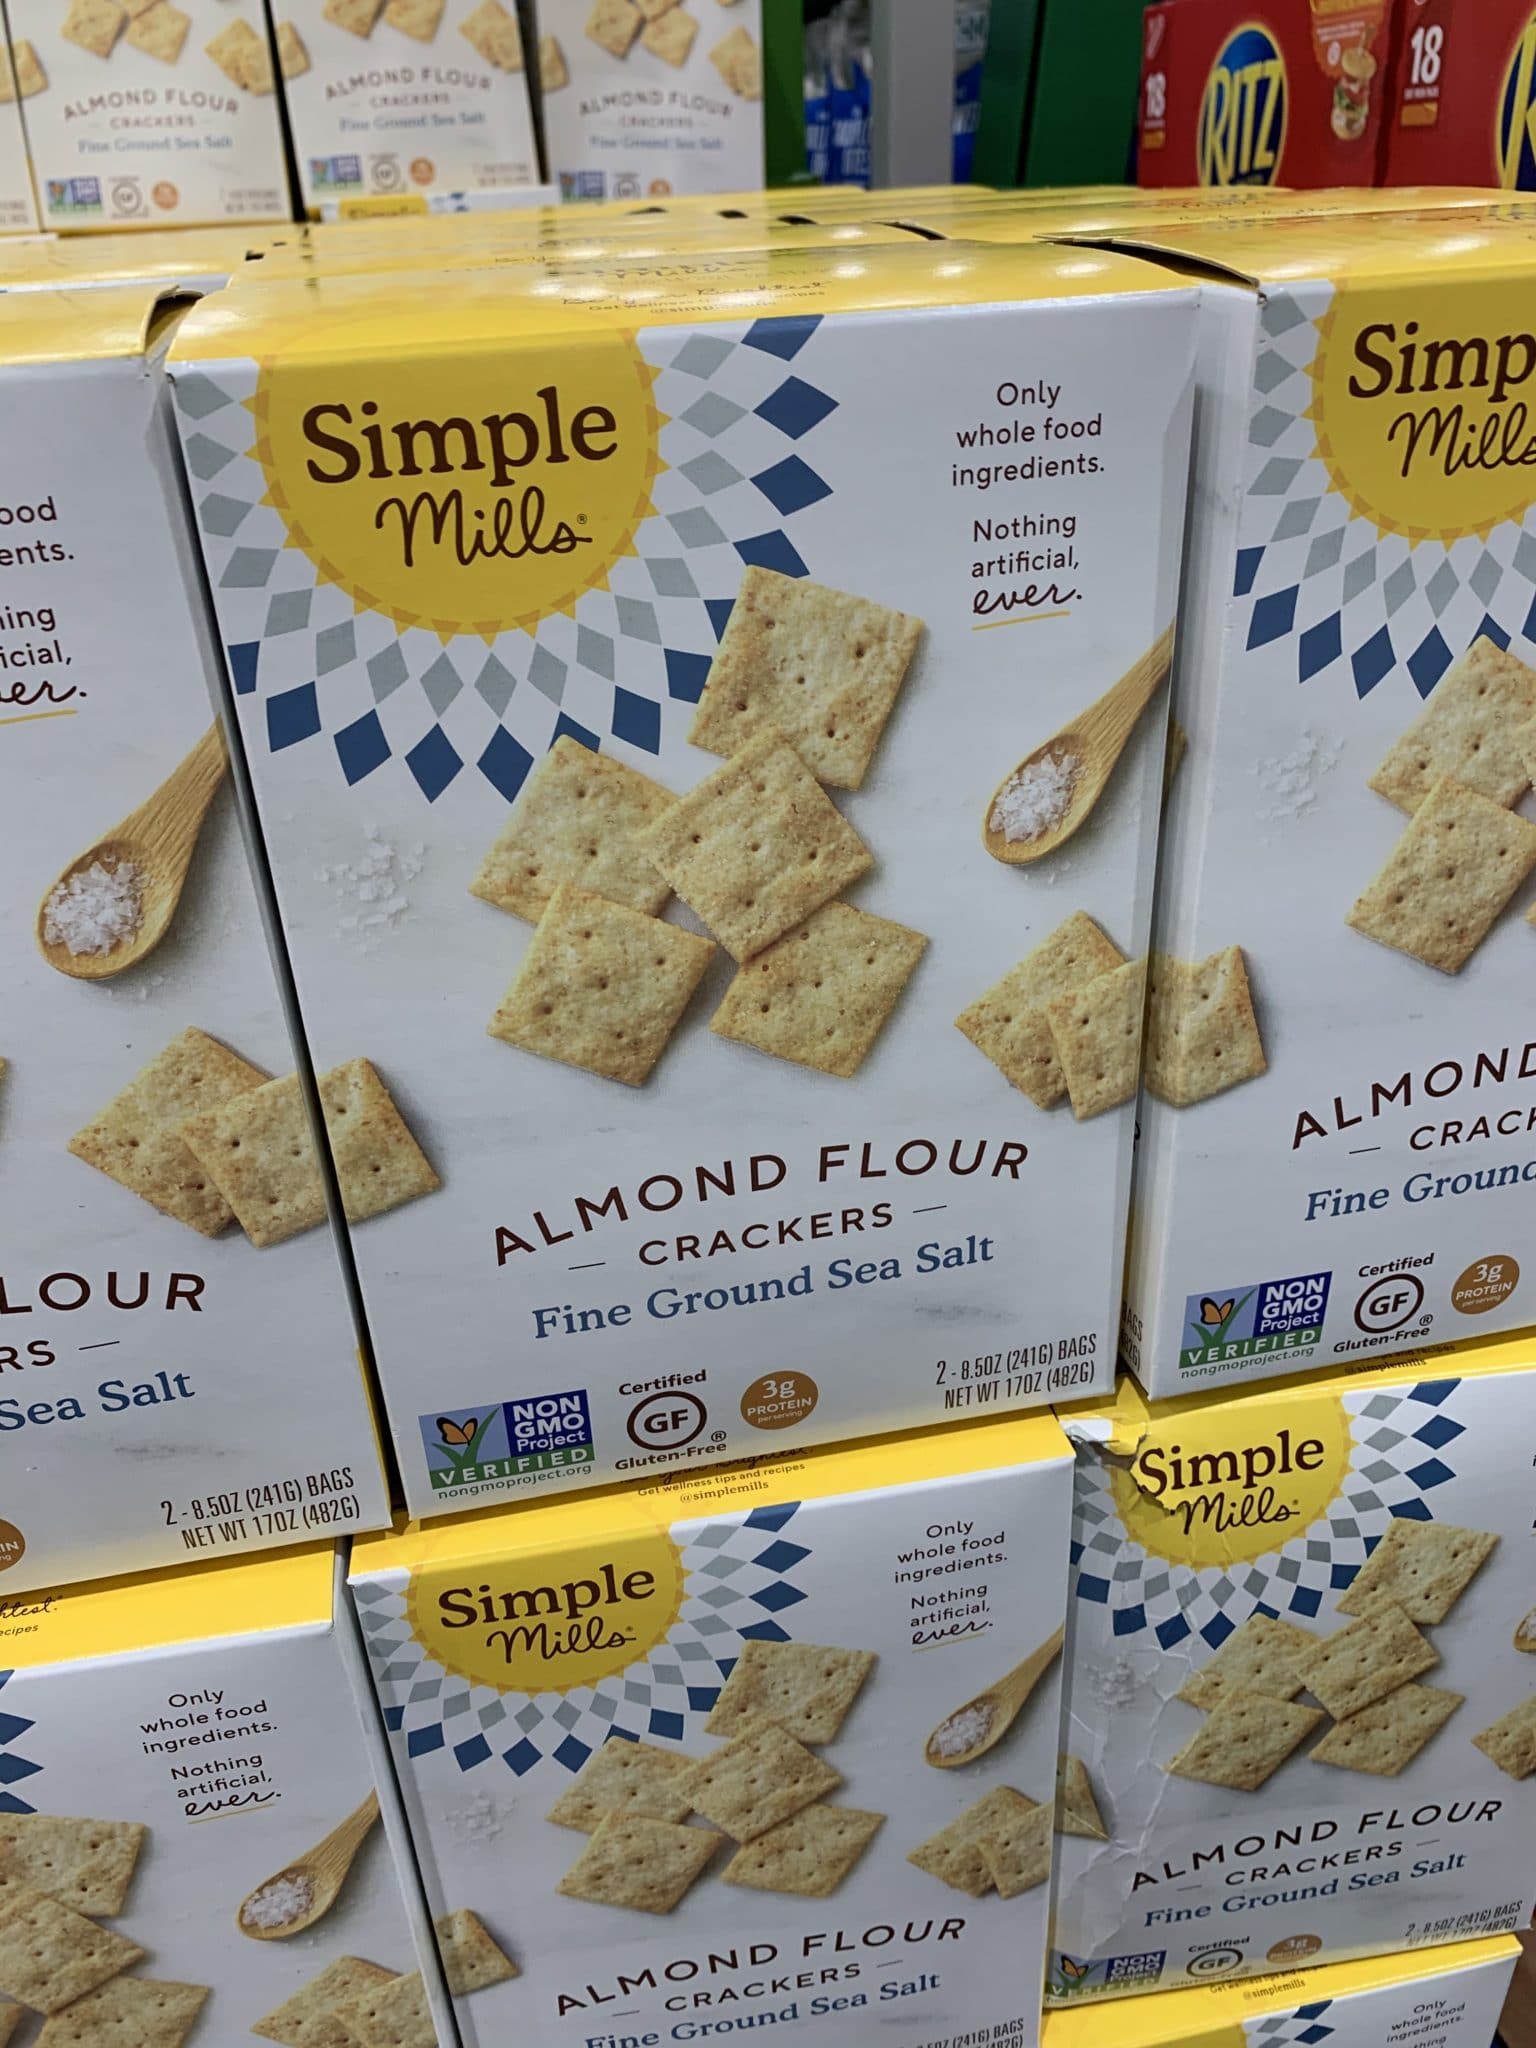 almond flour crackers from costco in yellow and white box